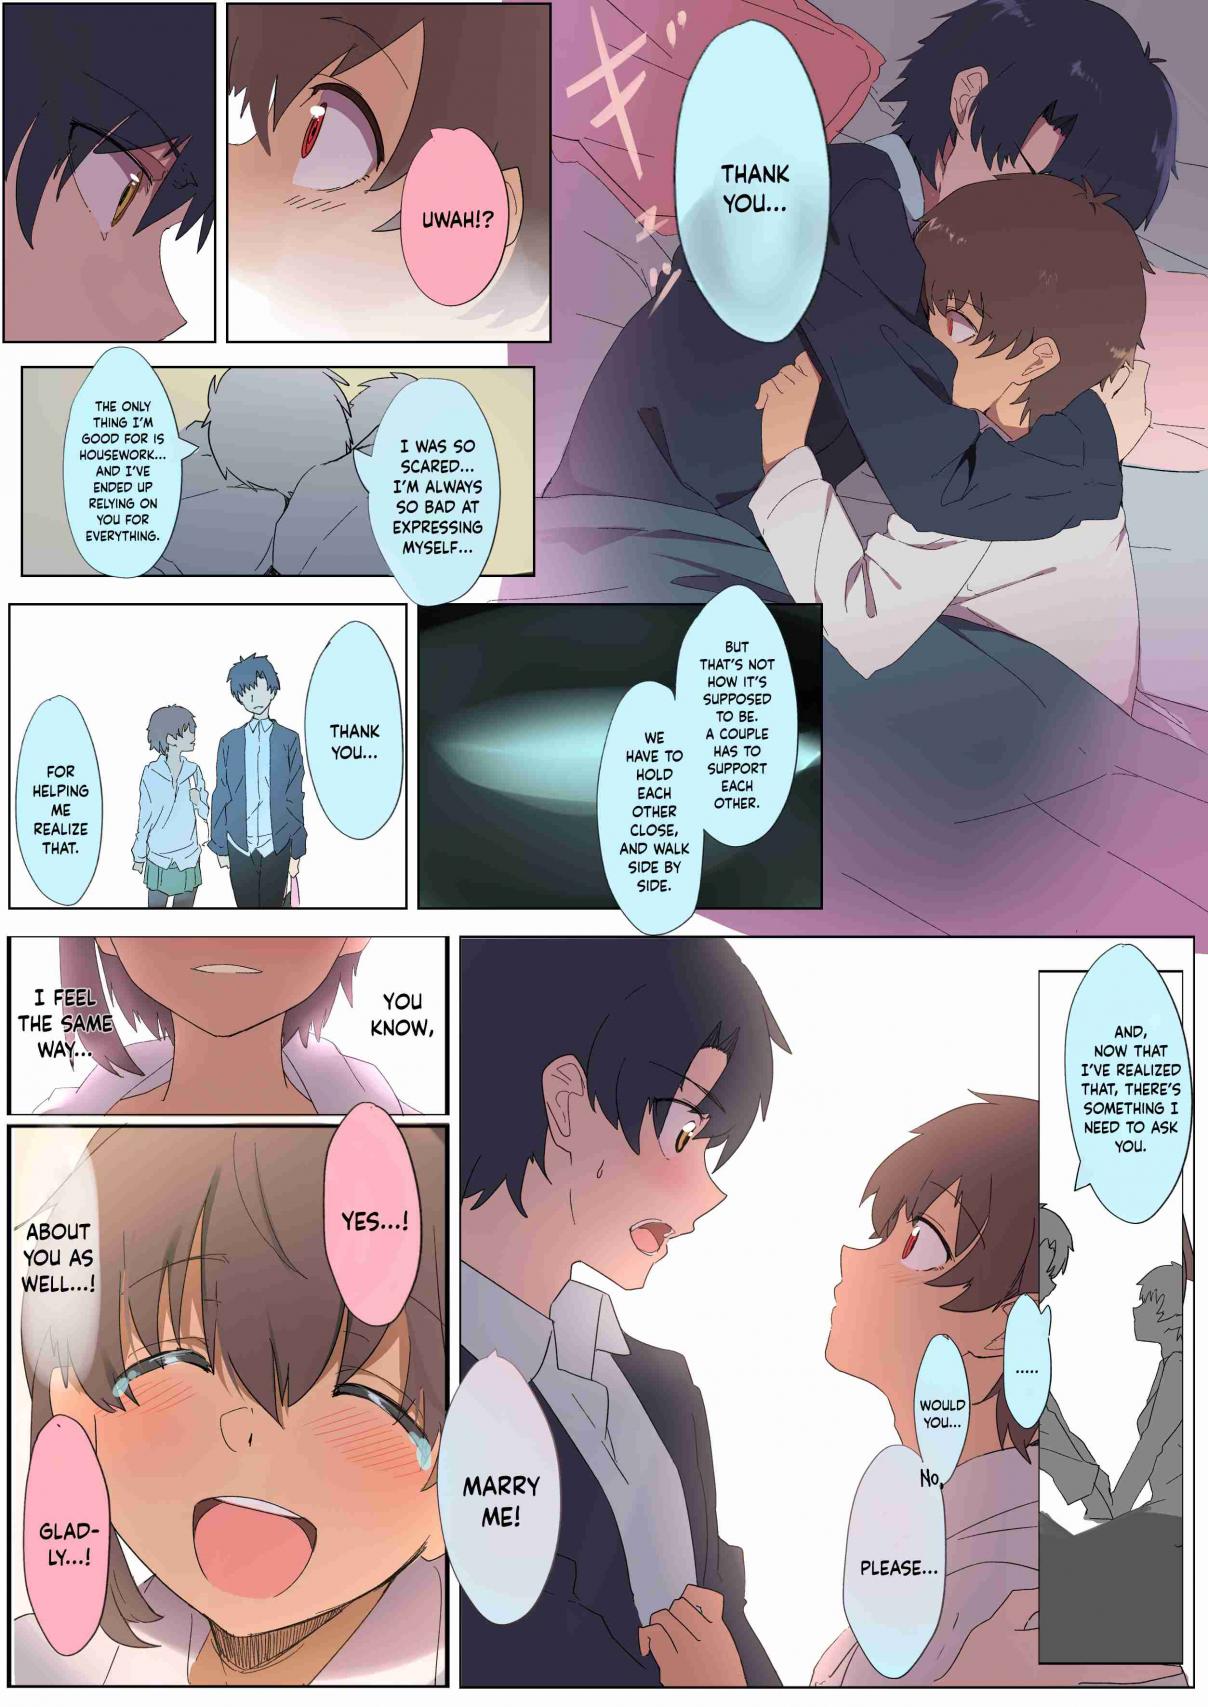 Mousou Timeline Vol. 1 Ch. 6.1 A Caring Tanned Girl and a Quiet Guy